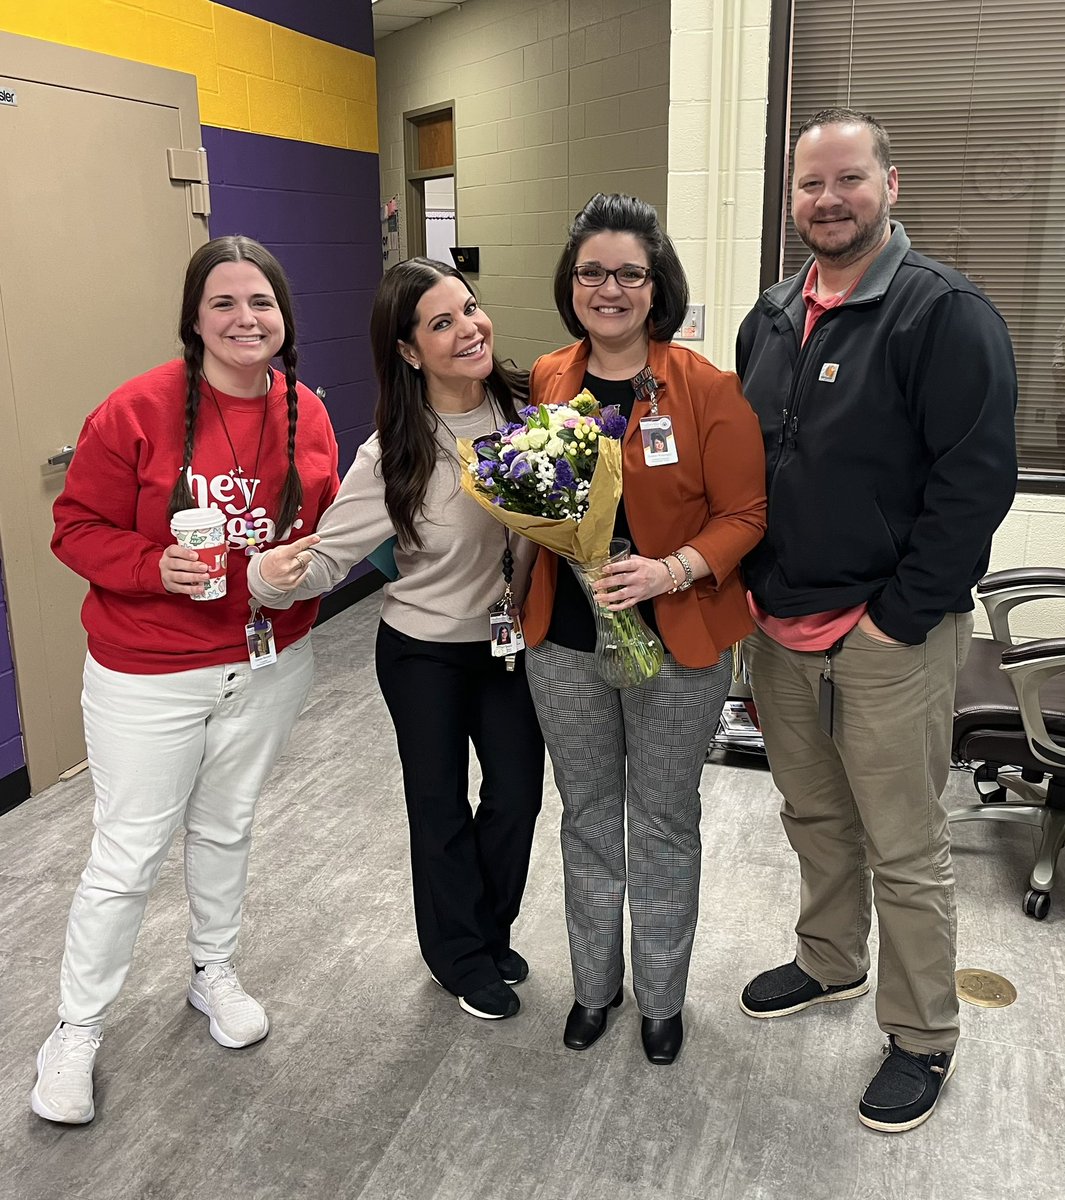 Congratulations to our very own Amber Wineinger! She was selected as the Region 7 Assistant Principal of the Year! @HallsvilleISD @Region7ESC